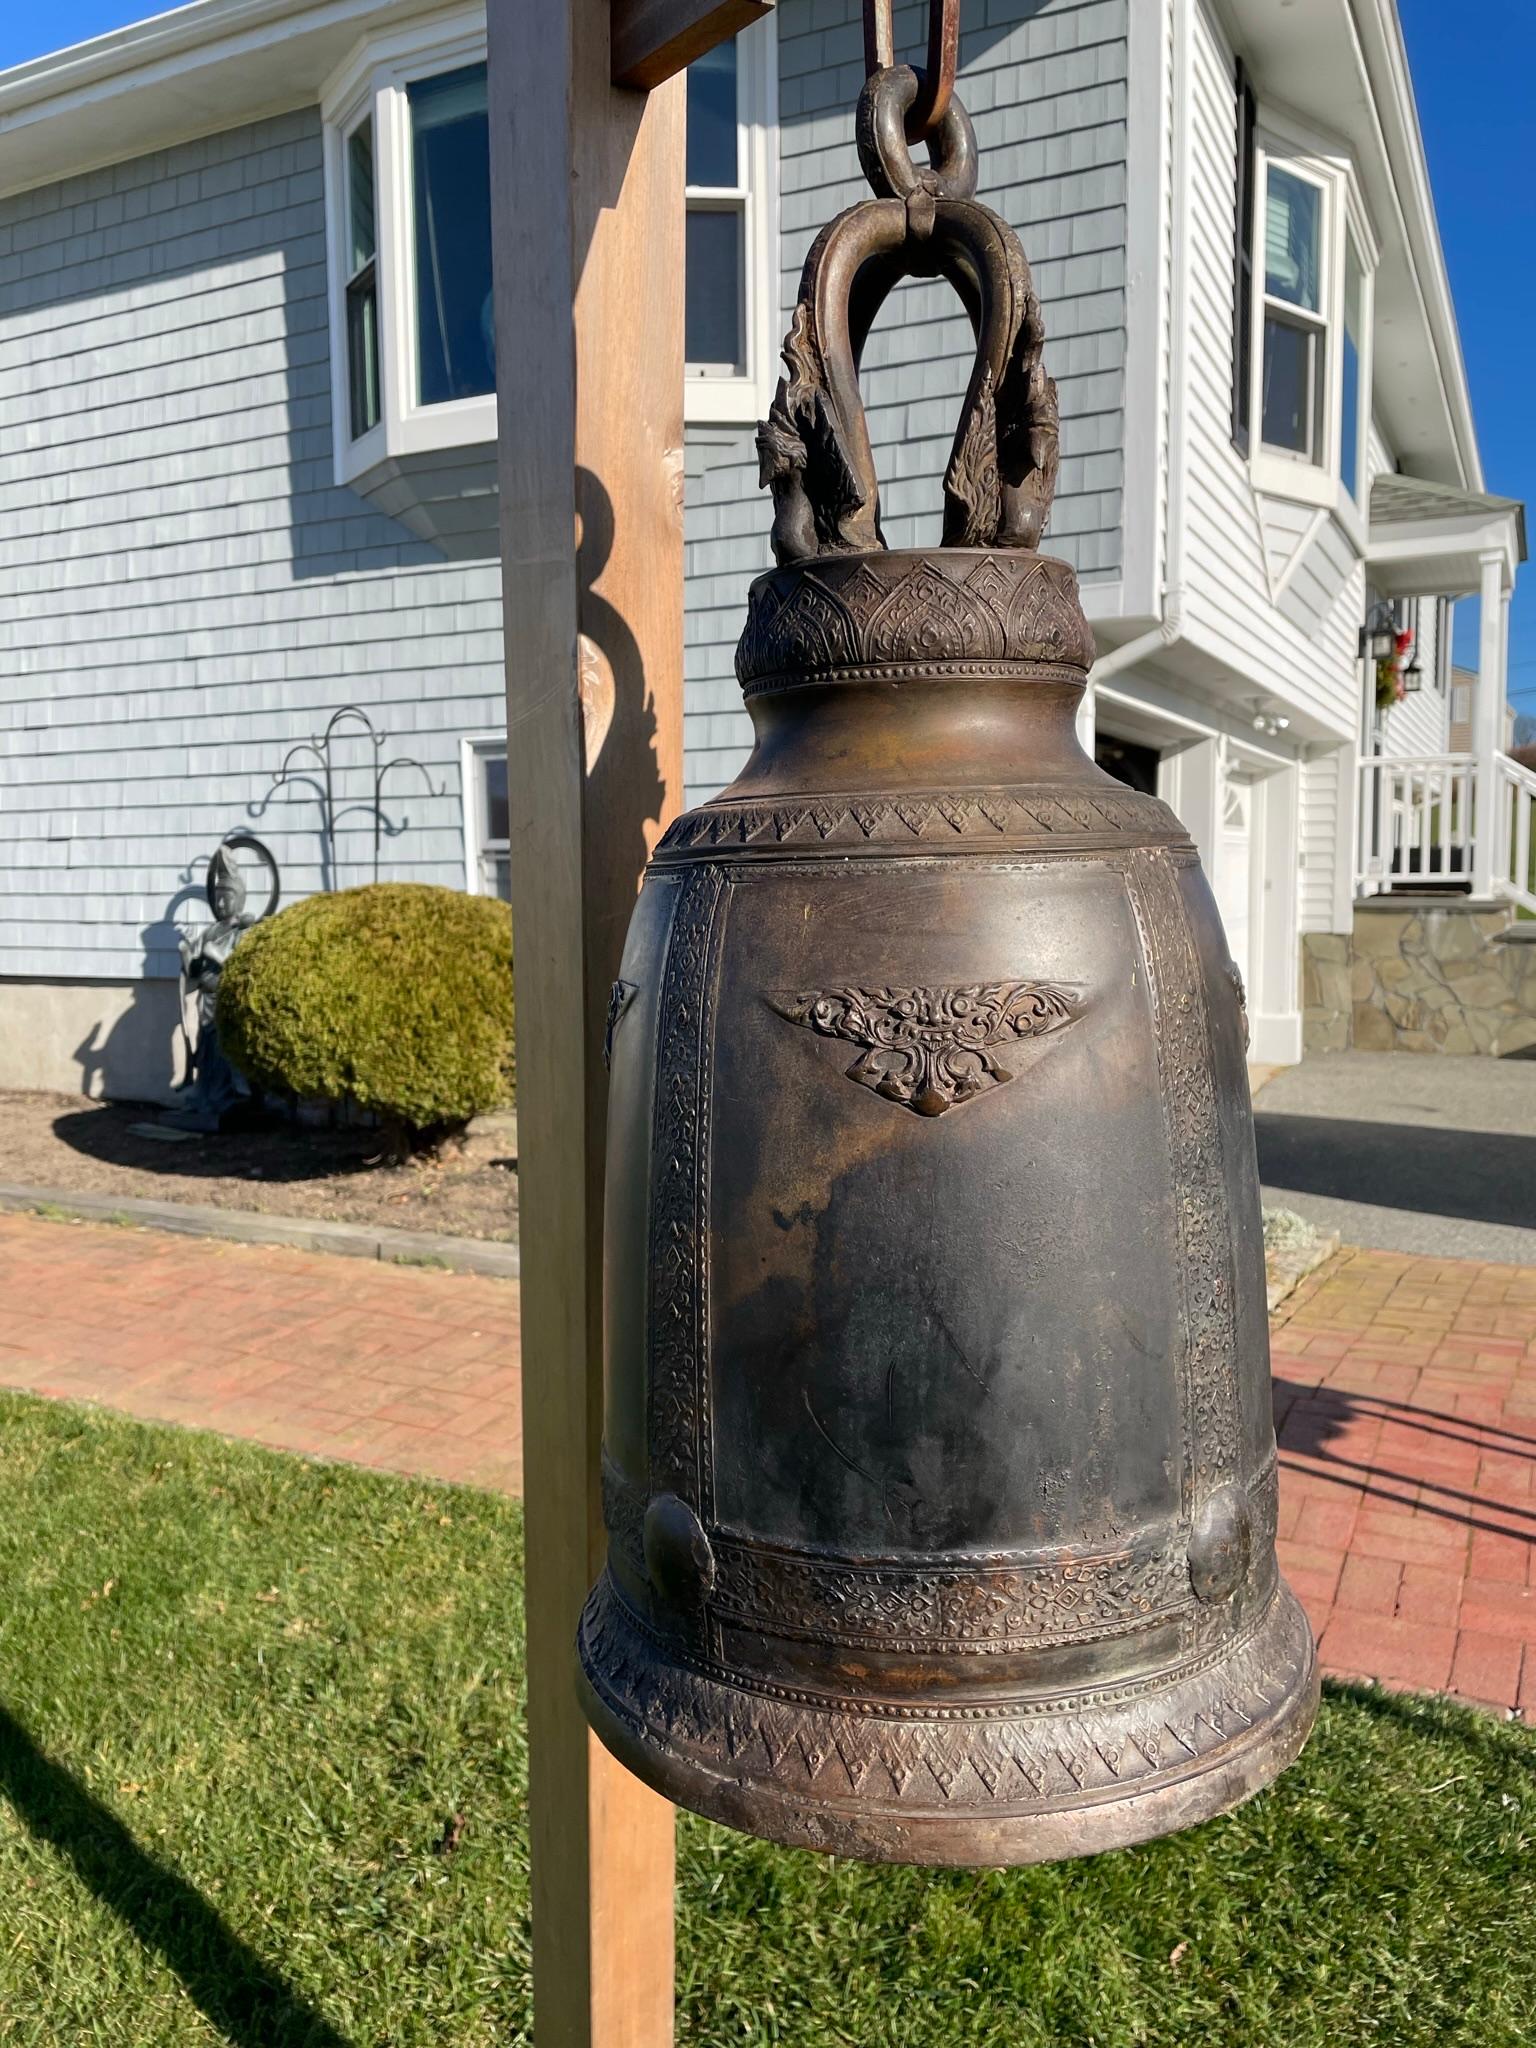 Only One.

For Your Garden setting or Indoors

Beautiful deep resonating ring tones await the new owner of this one-of-a-kind master bronze work.

This superb antique hand cast bronze temple bell dates to the early 20th century. 

Dimensions:
Bronze